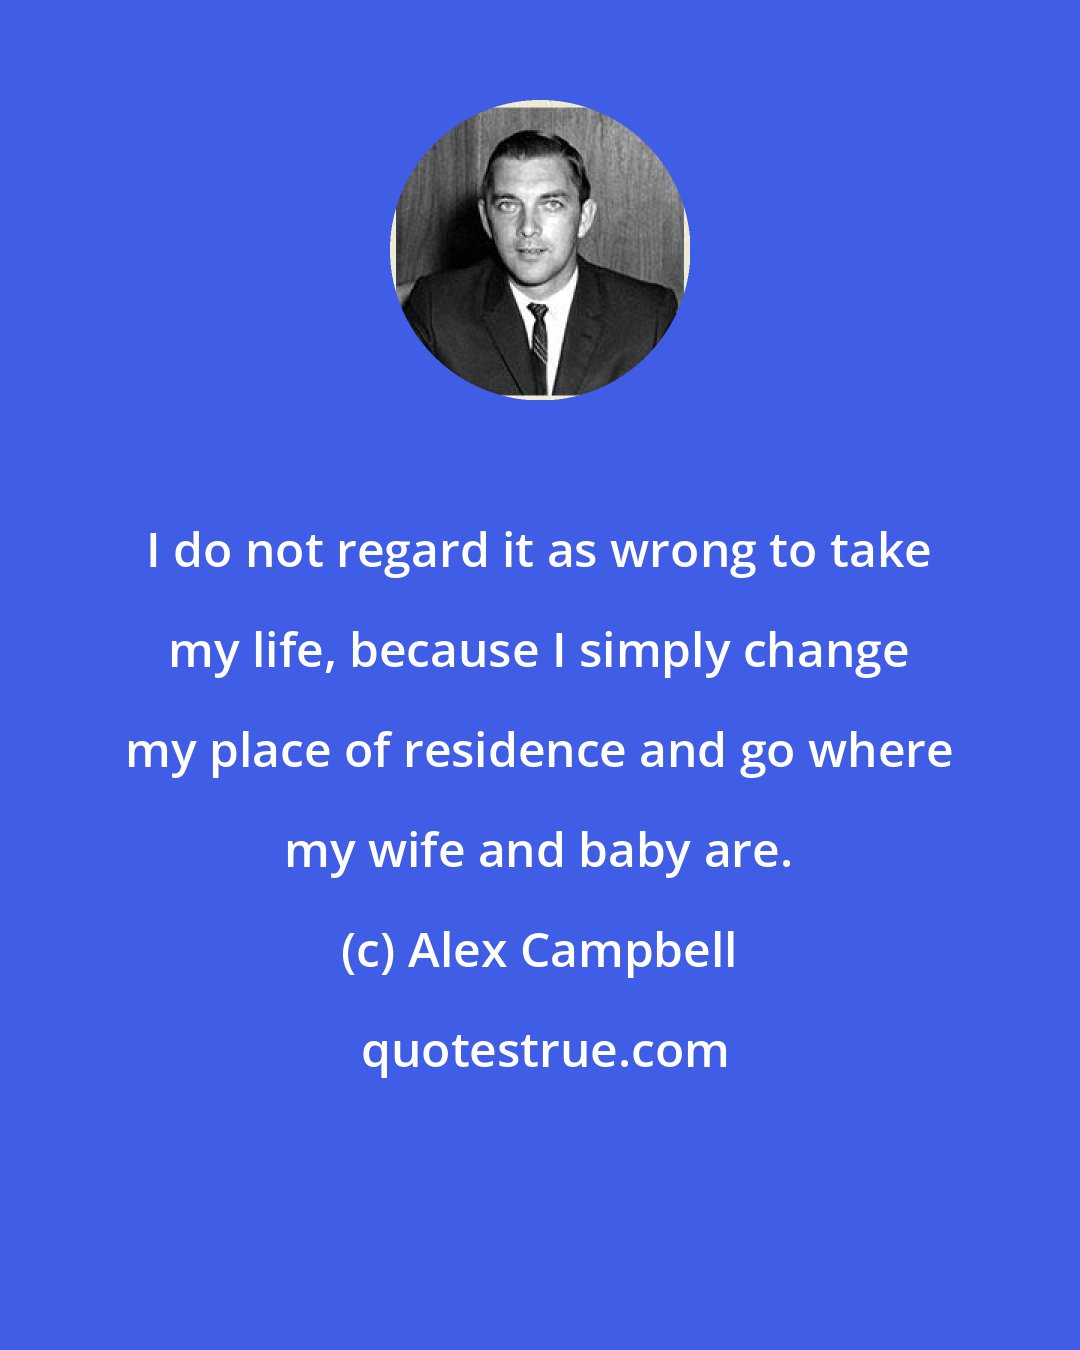 Alex Campbell: I do not regard it as wrong to take my life, because I simply change my place of residence and go where my wife and baby are.